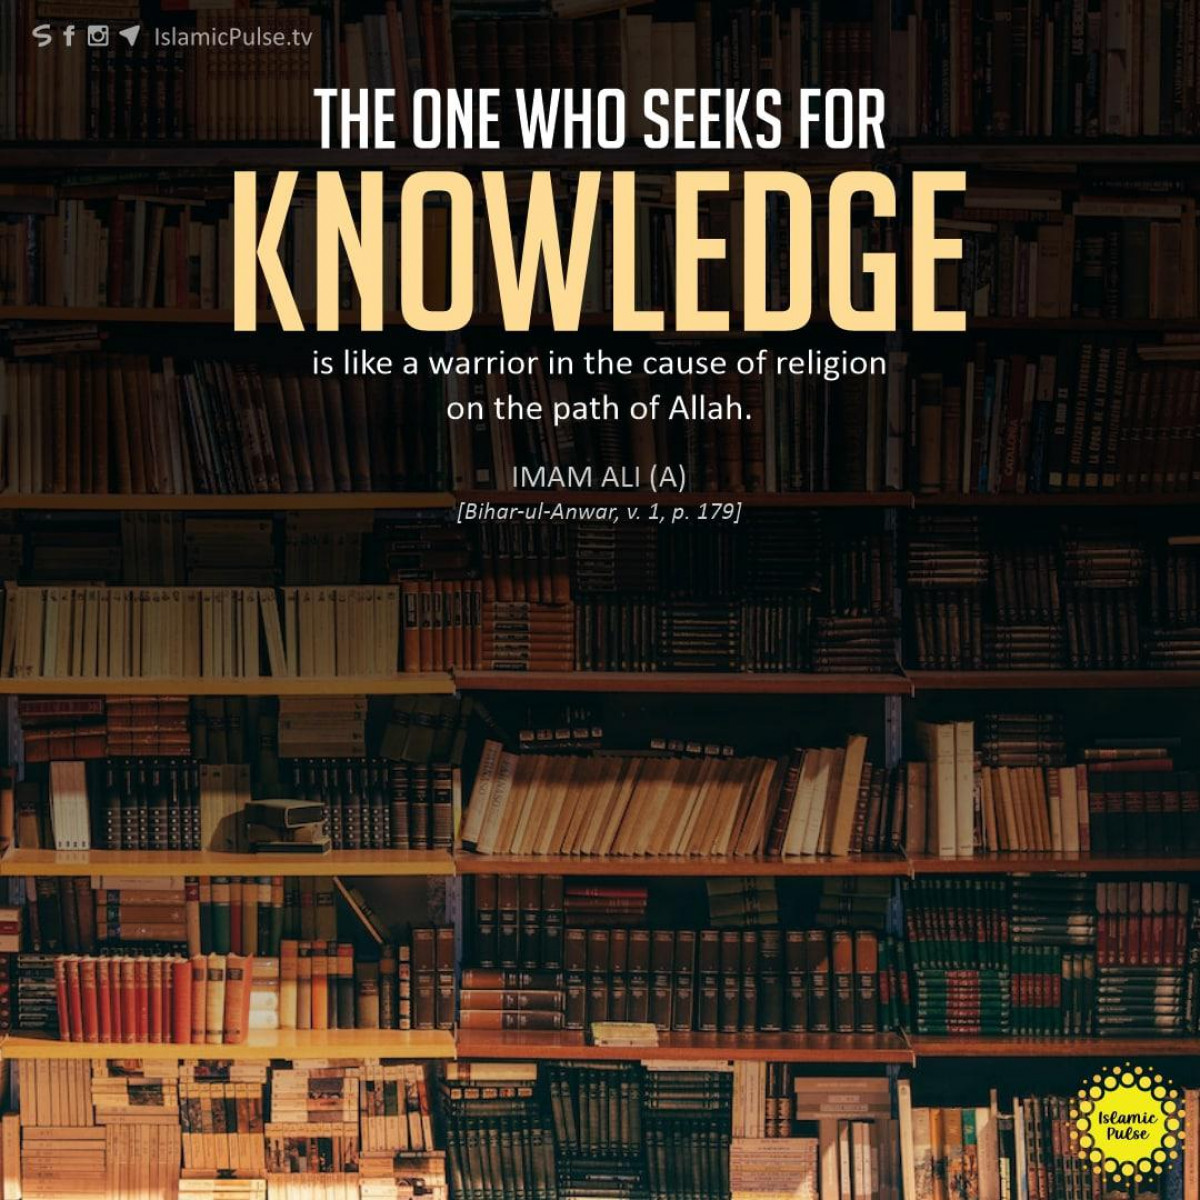 The one who seeks for knowledge